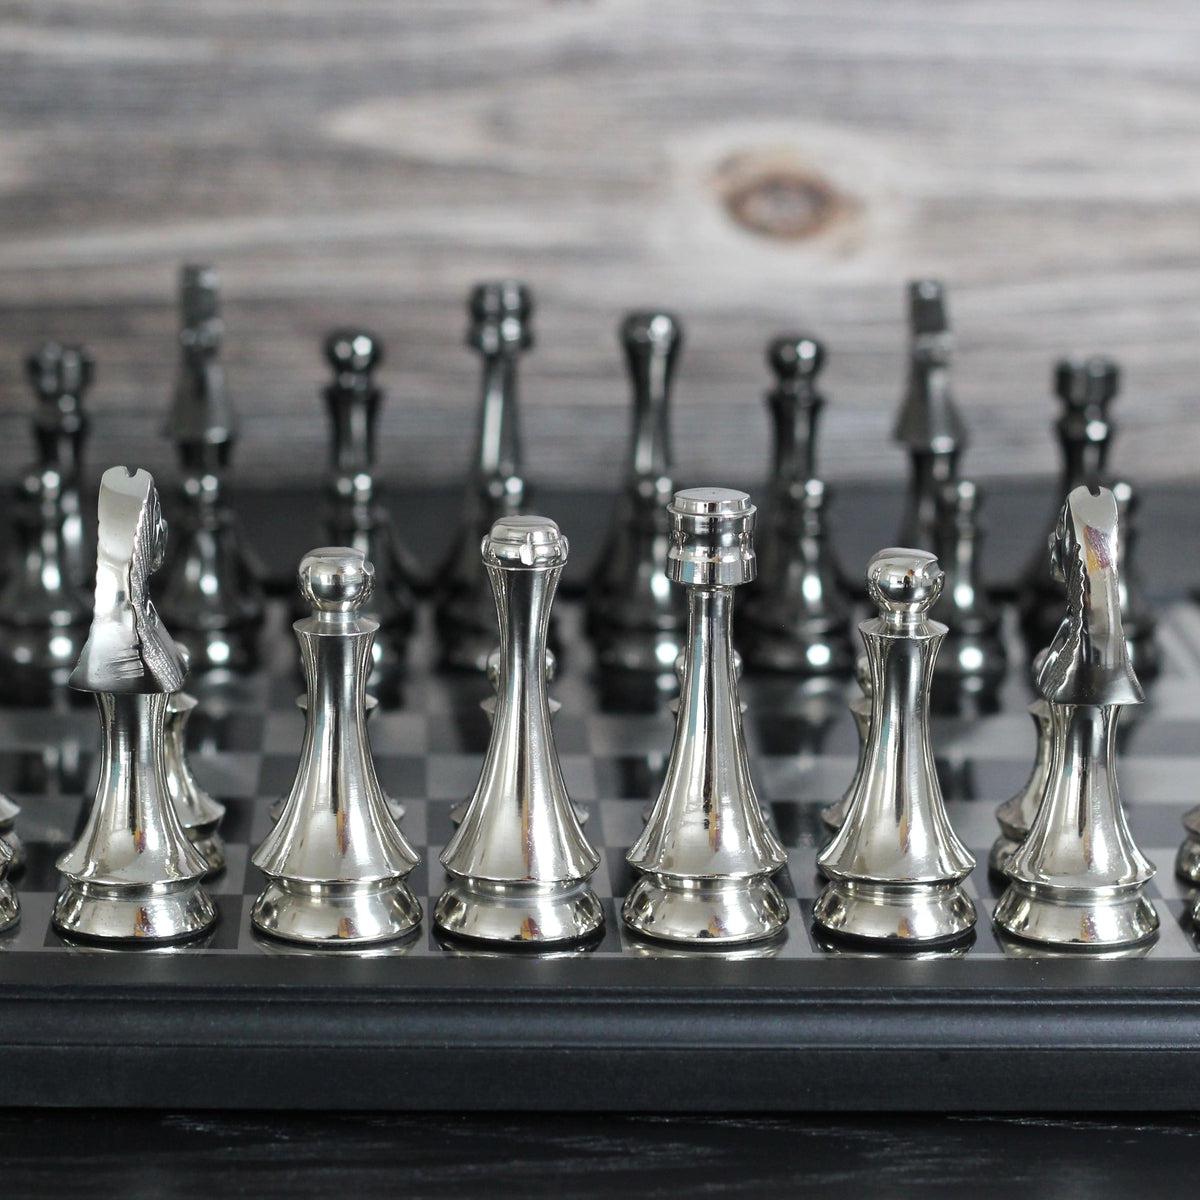 Scotch Gambit - Gorgeous Black and Silver Metallic Chess Set - Marble Cultures